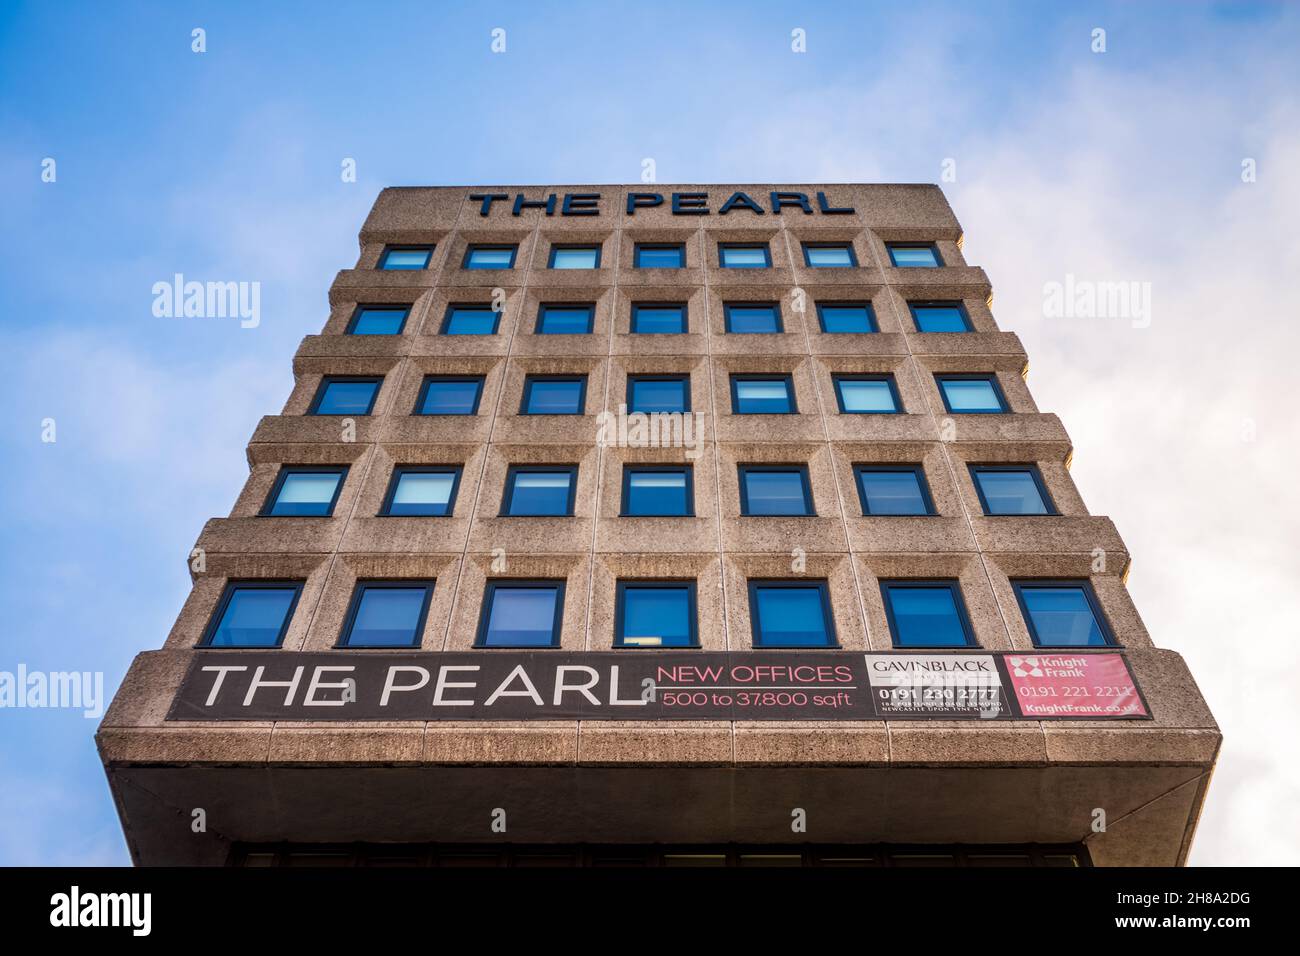 The Pearl Newcastle - refurbished offices in Newcastle City Centre, formerly the Pearl Assurance Building. Brutalist style office block. Stock Photo